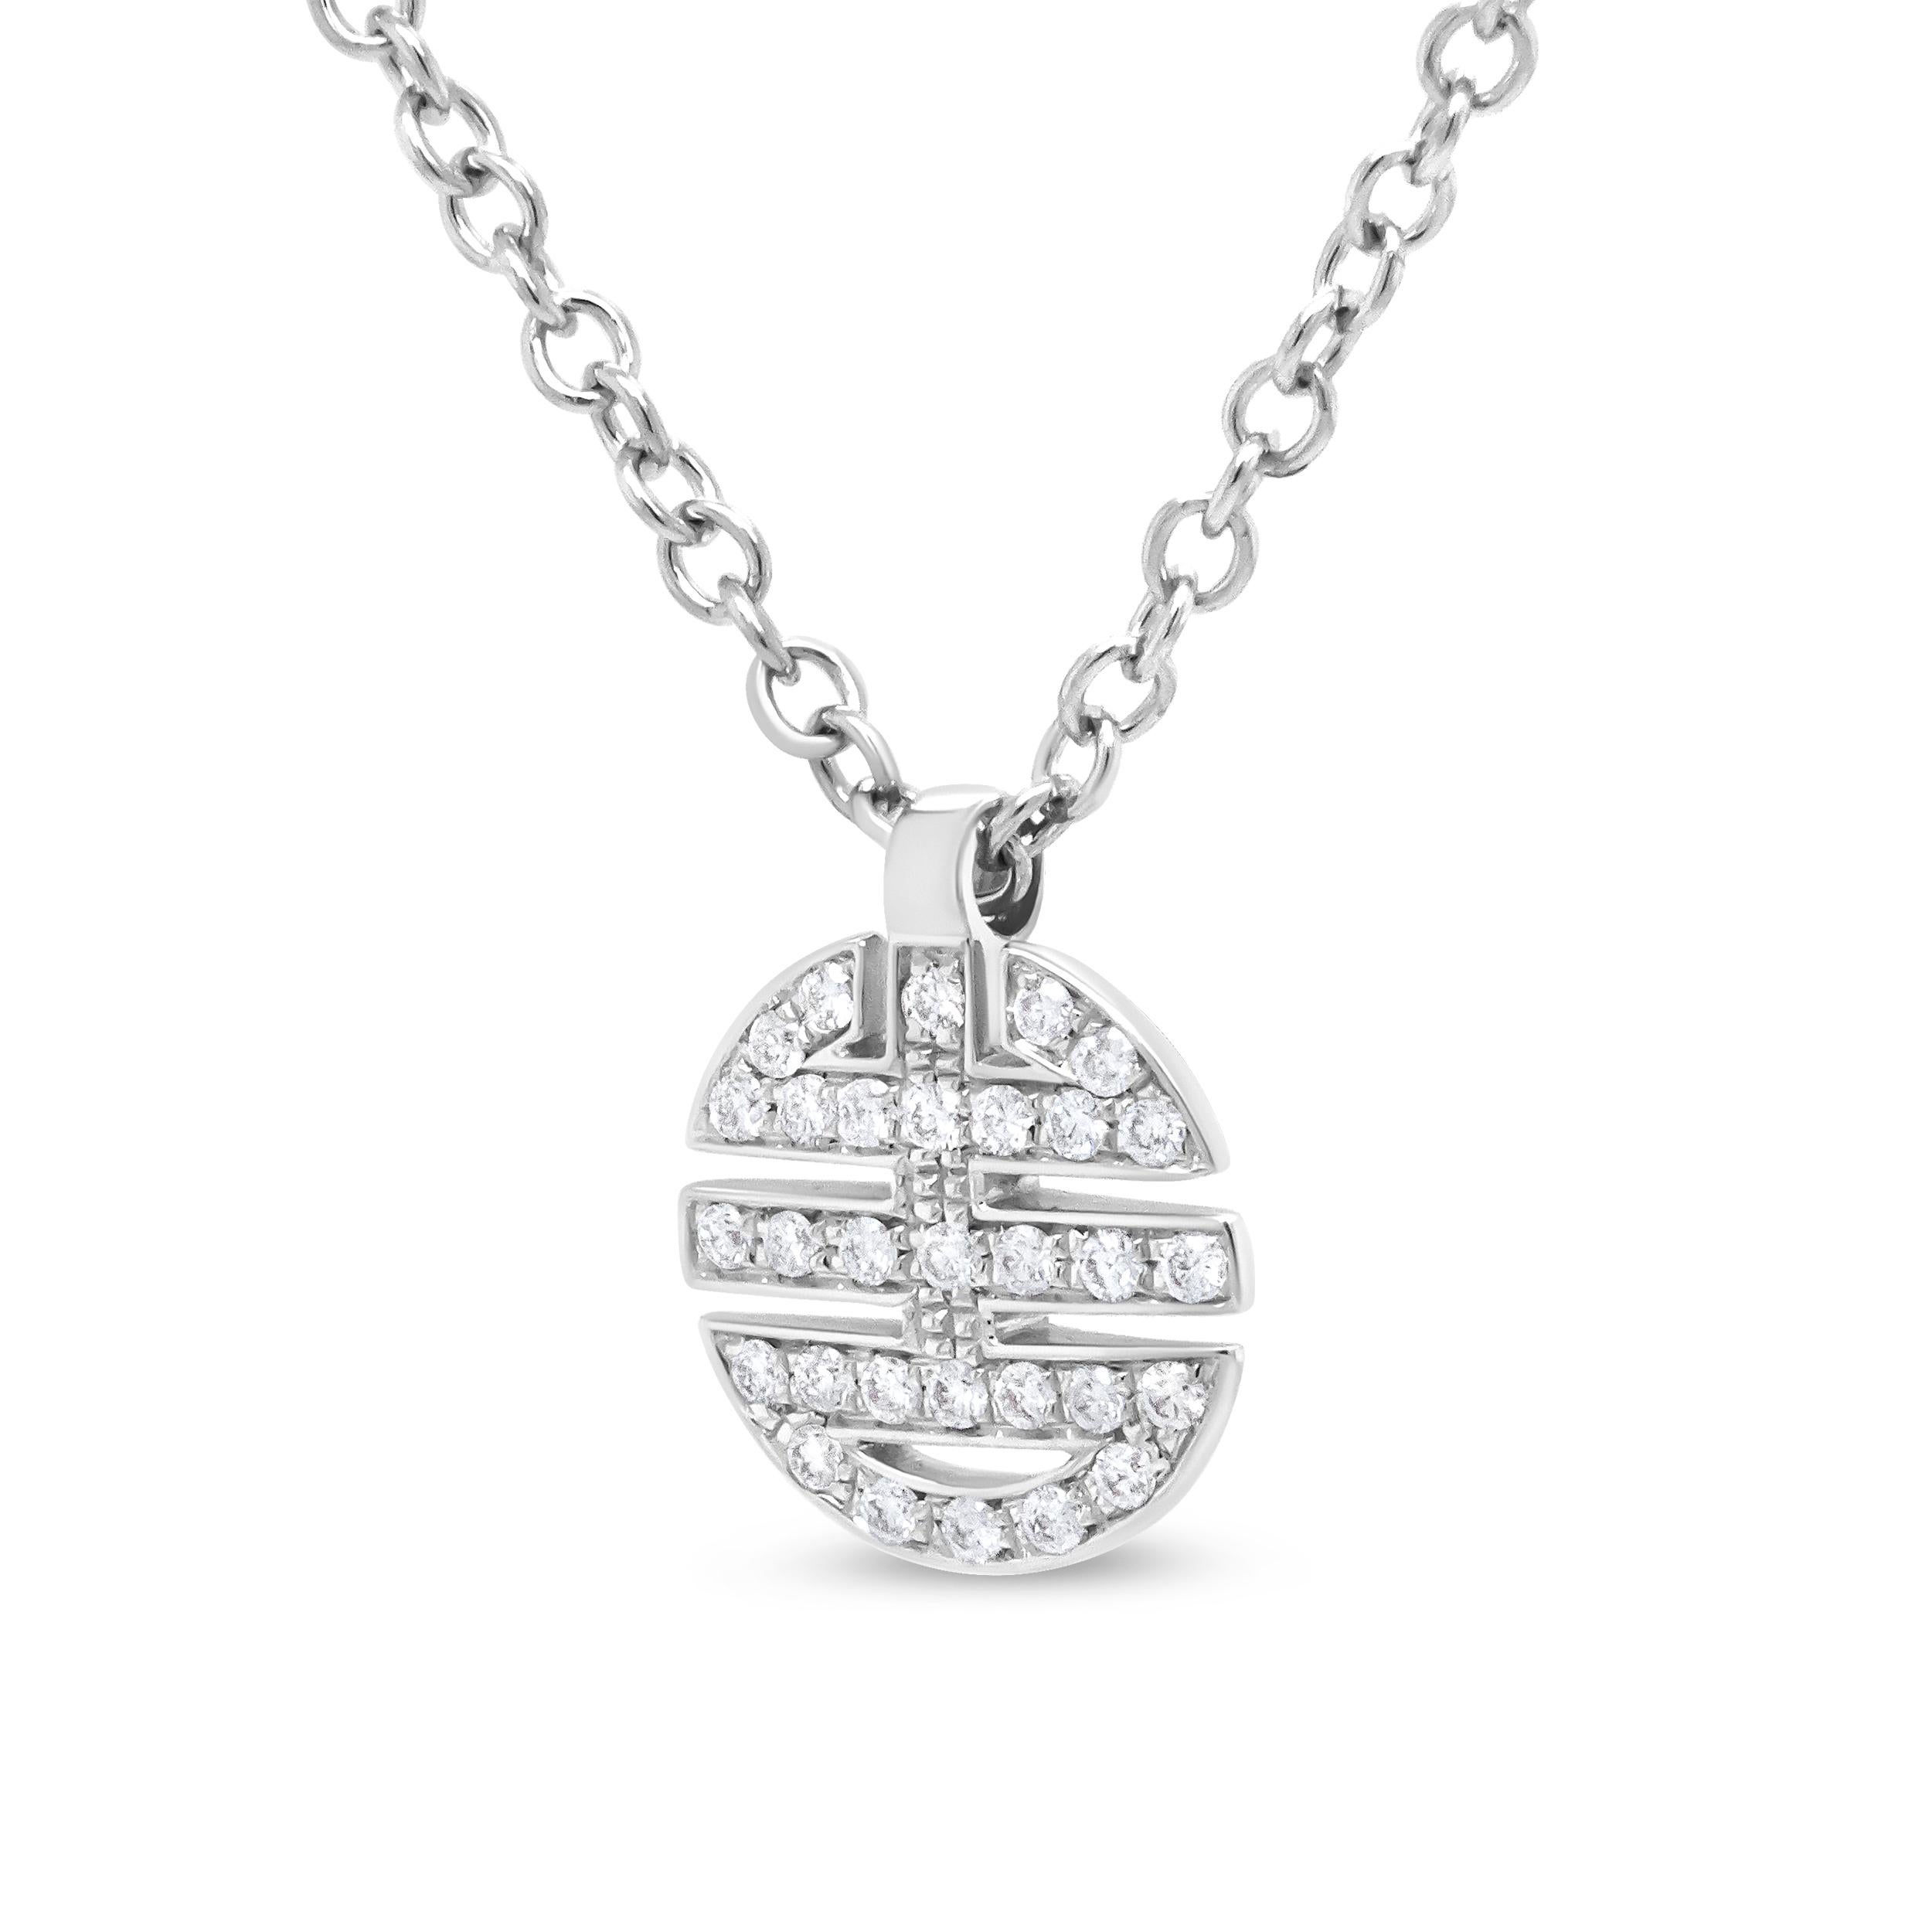 Bring luck into your life with this diamond pendant necklace crafted from genuine 18k white gold. The shou character symbolizes a long life and represents prosperity. Emblazoned with sparkling white diamonds in prong-settings, this pendant shapes